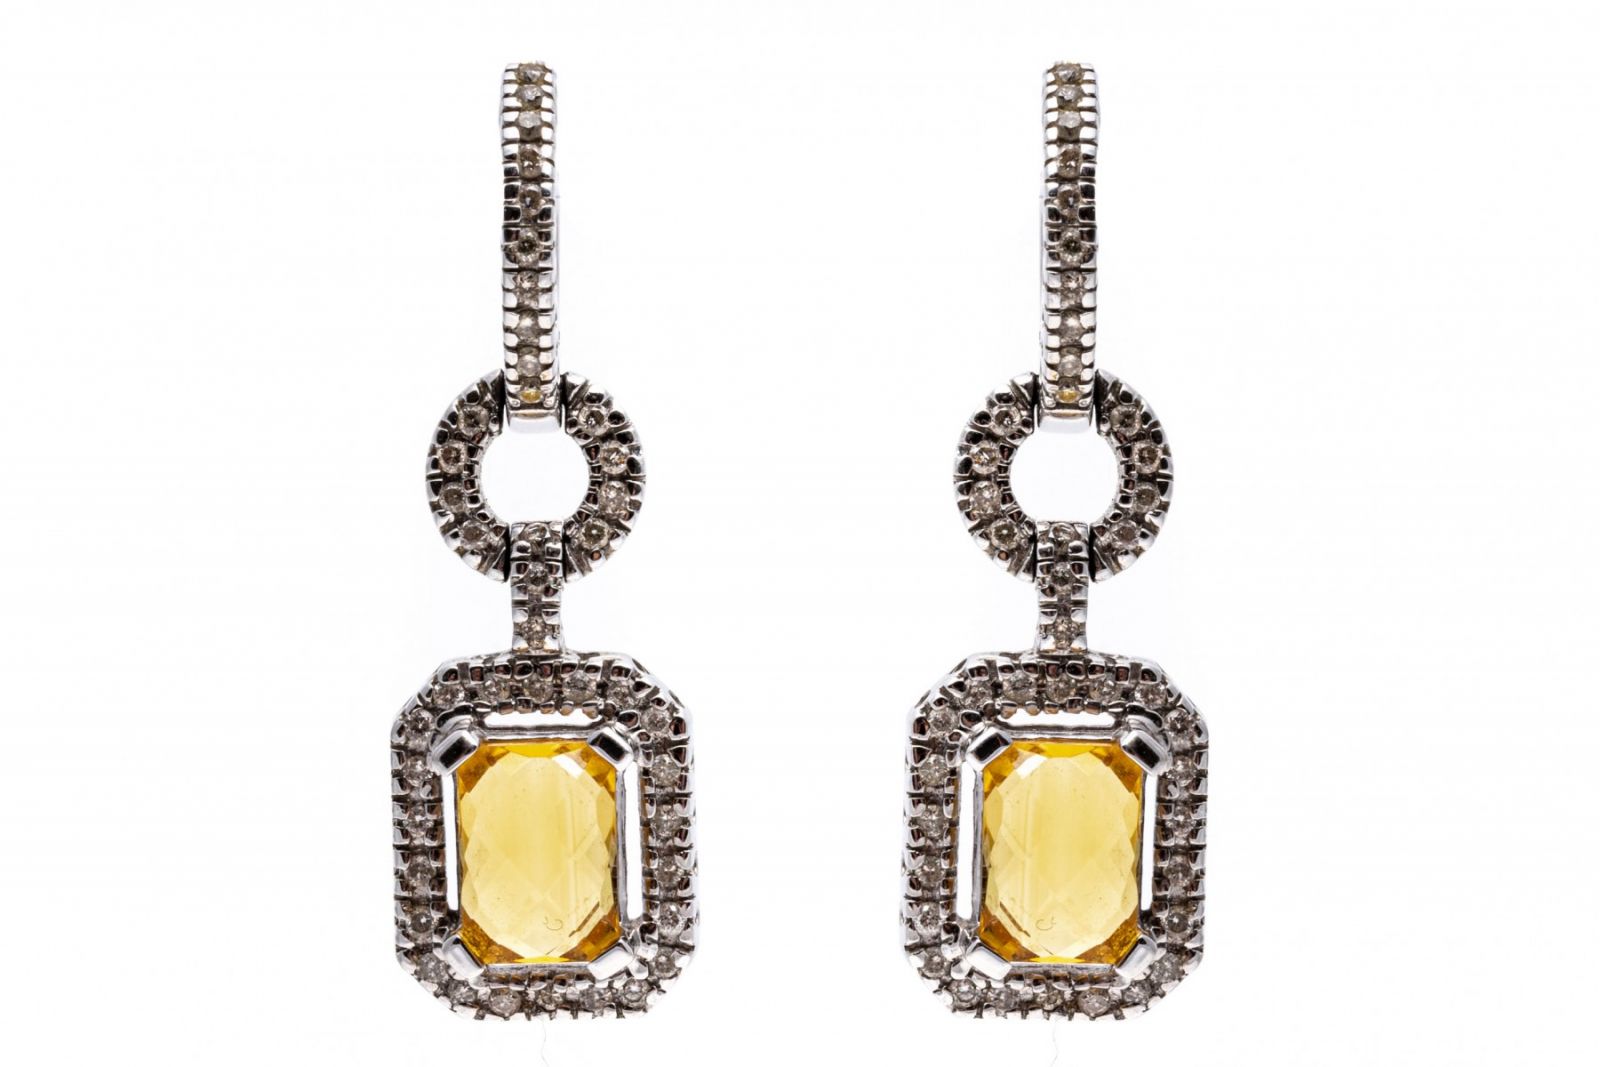 14K white gold dangle earrings set with rectangular cut citrines displaying a light pineapple yellow. Framing the citrines are round cut diamonds.